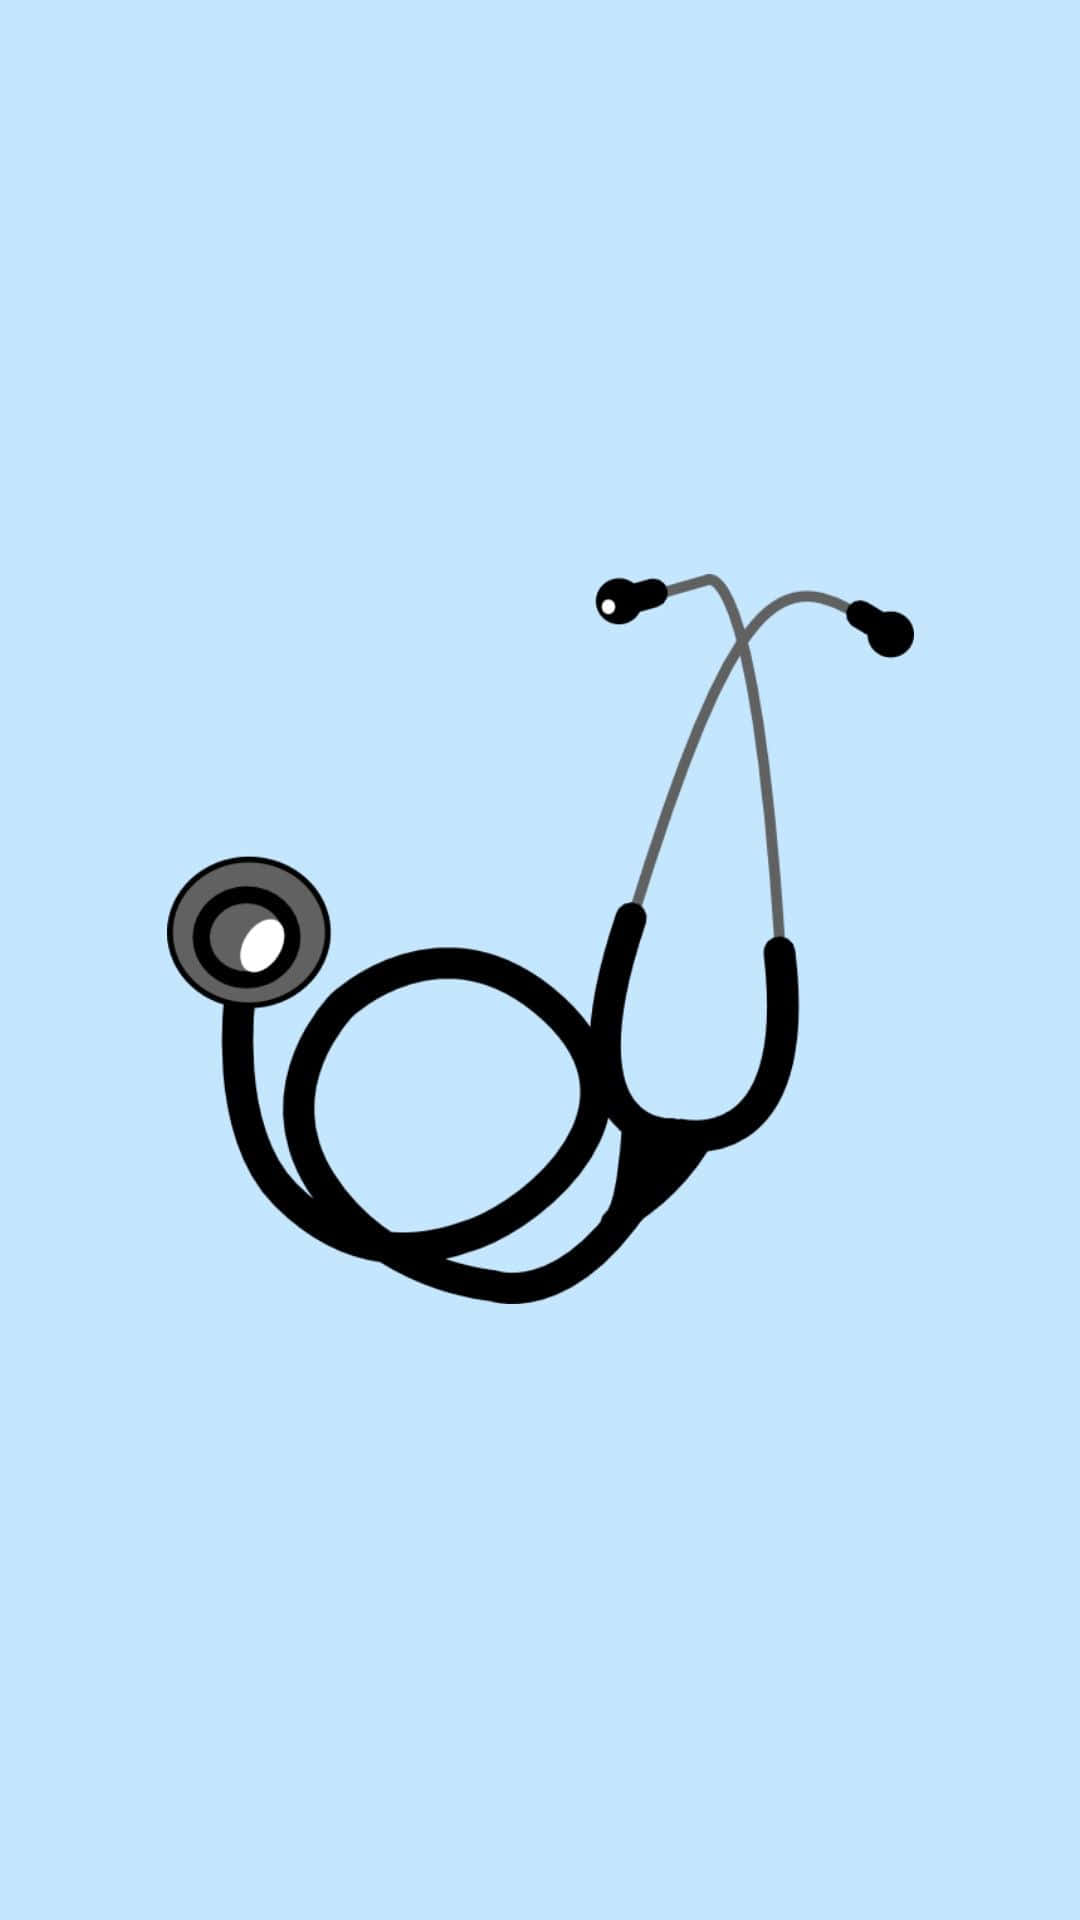 Stethoscope Icon Simple Background Wallpaper